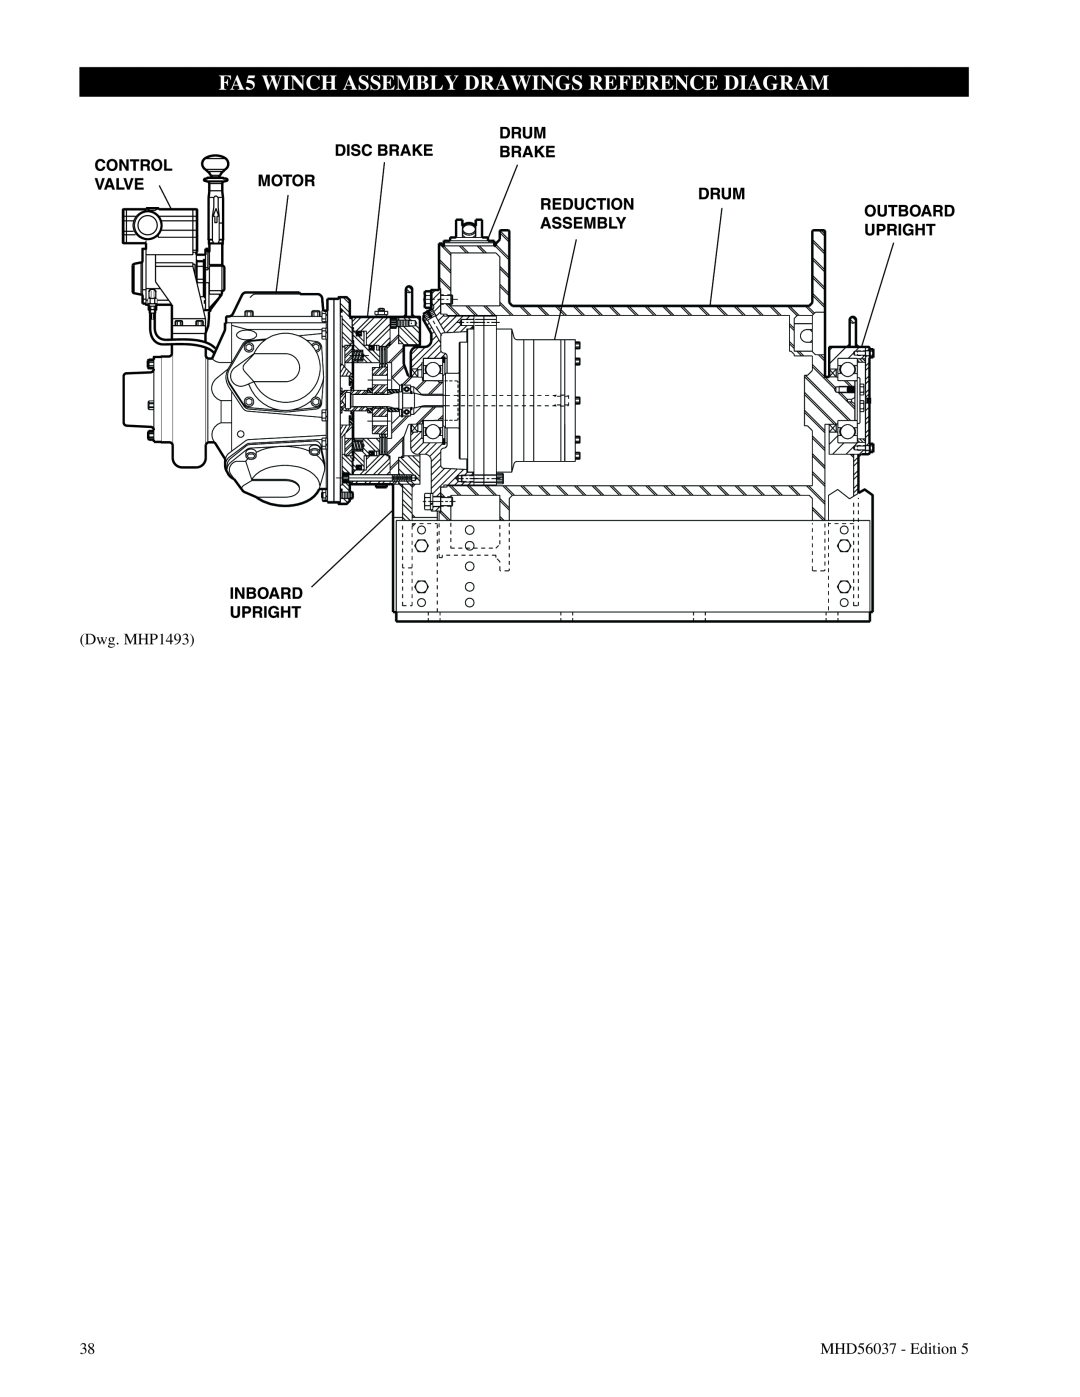 Ingersoll-Rand FA5T manual FA5 WINCH ASSEMBLY DRAWINGS REFERENCE DIAGRAM, Dwg. MHP1493, MHD56037 - Edition 